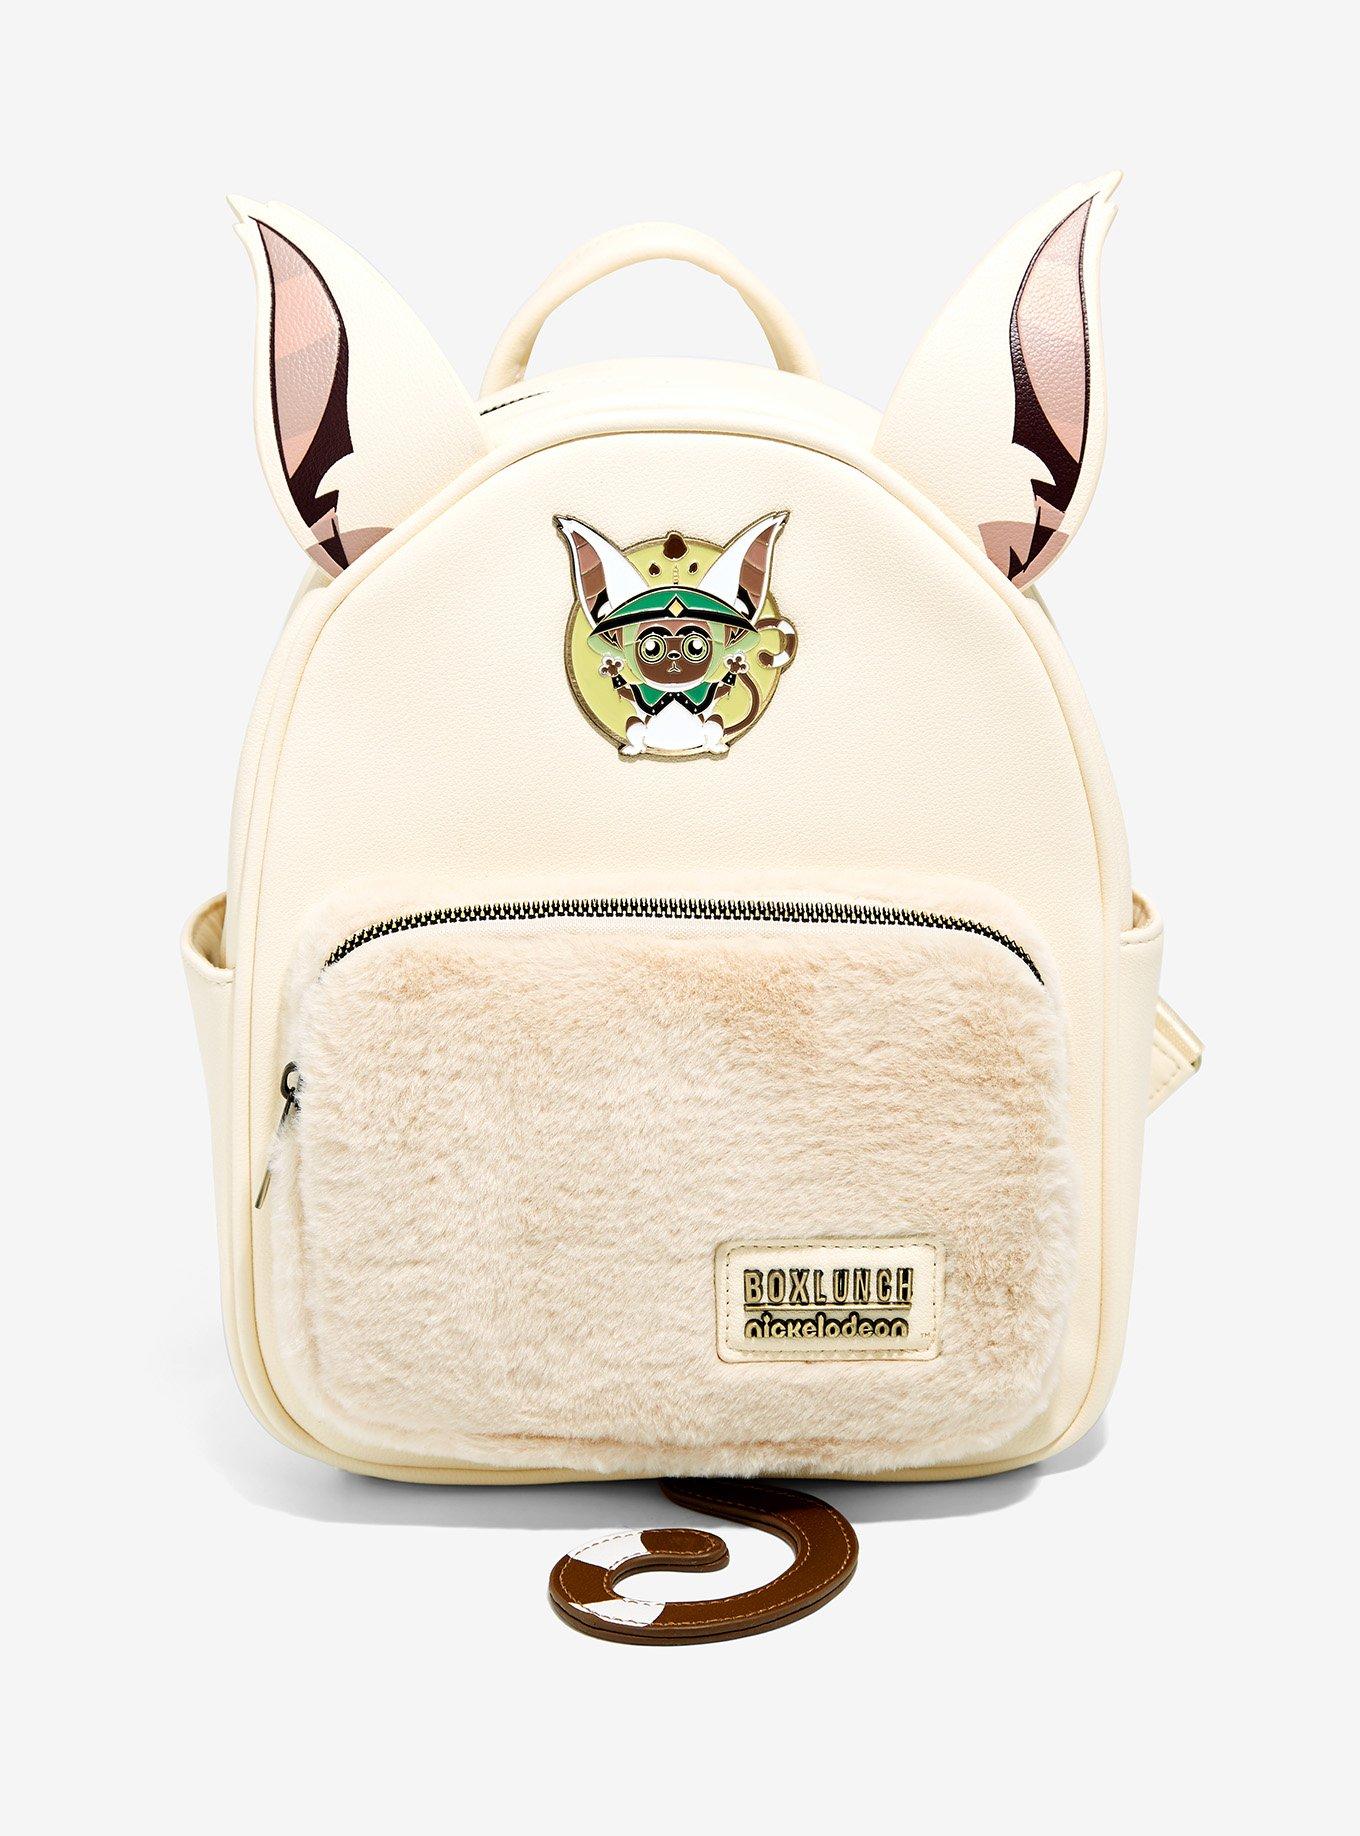 Avatar: The Last Airbender Chibi Animals Mini Backpack - BoxLunch Exclusive, BoxLunch